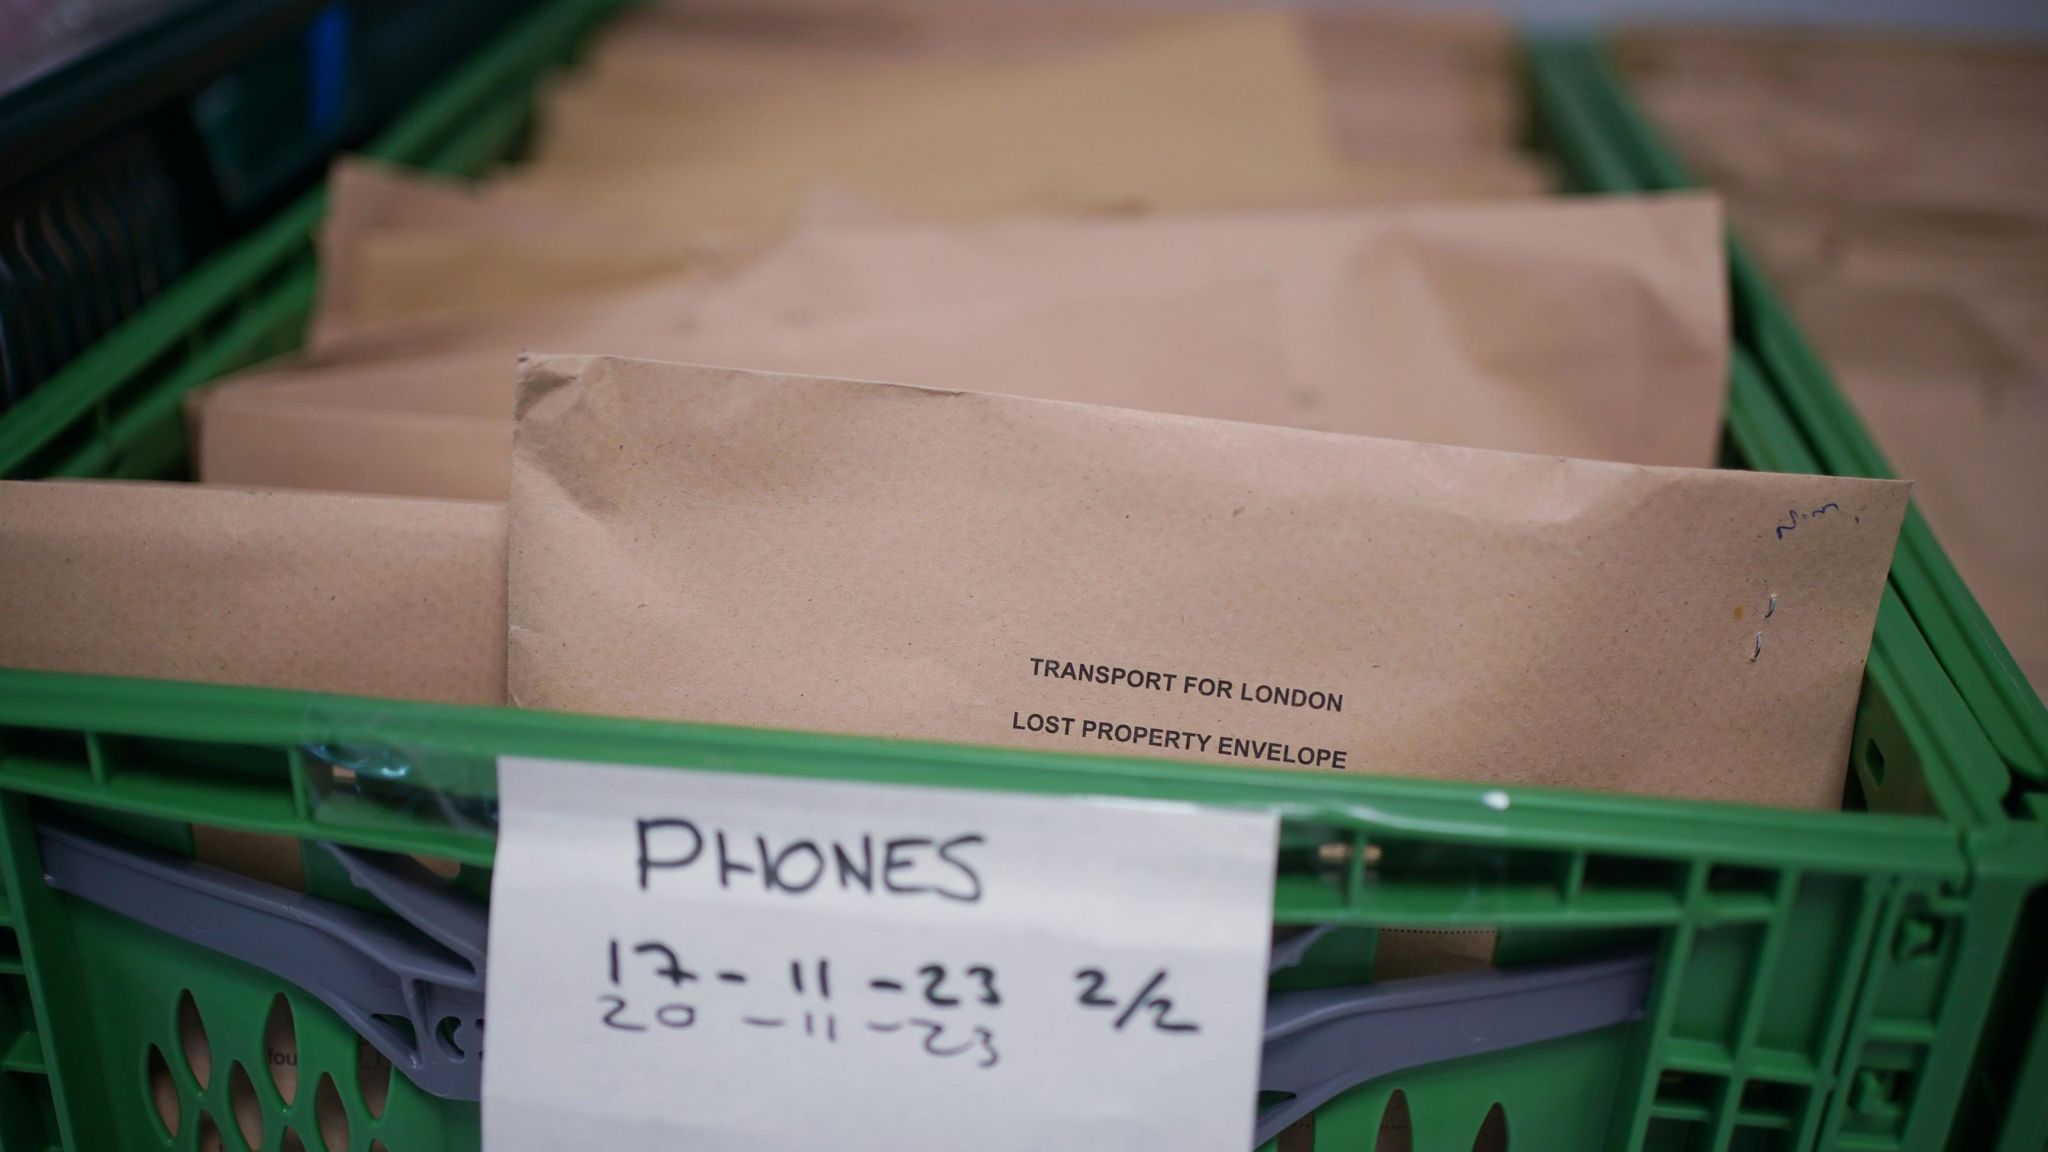 Iphones are packaged up and dated